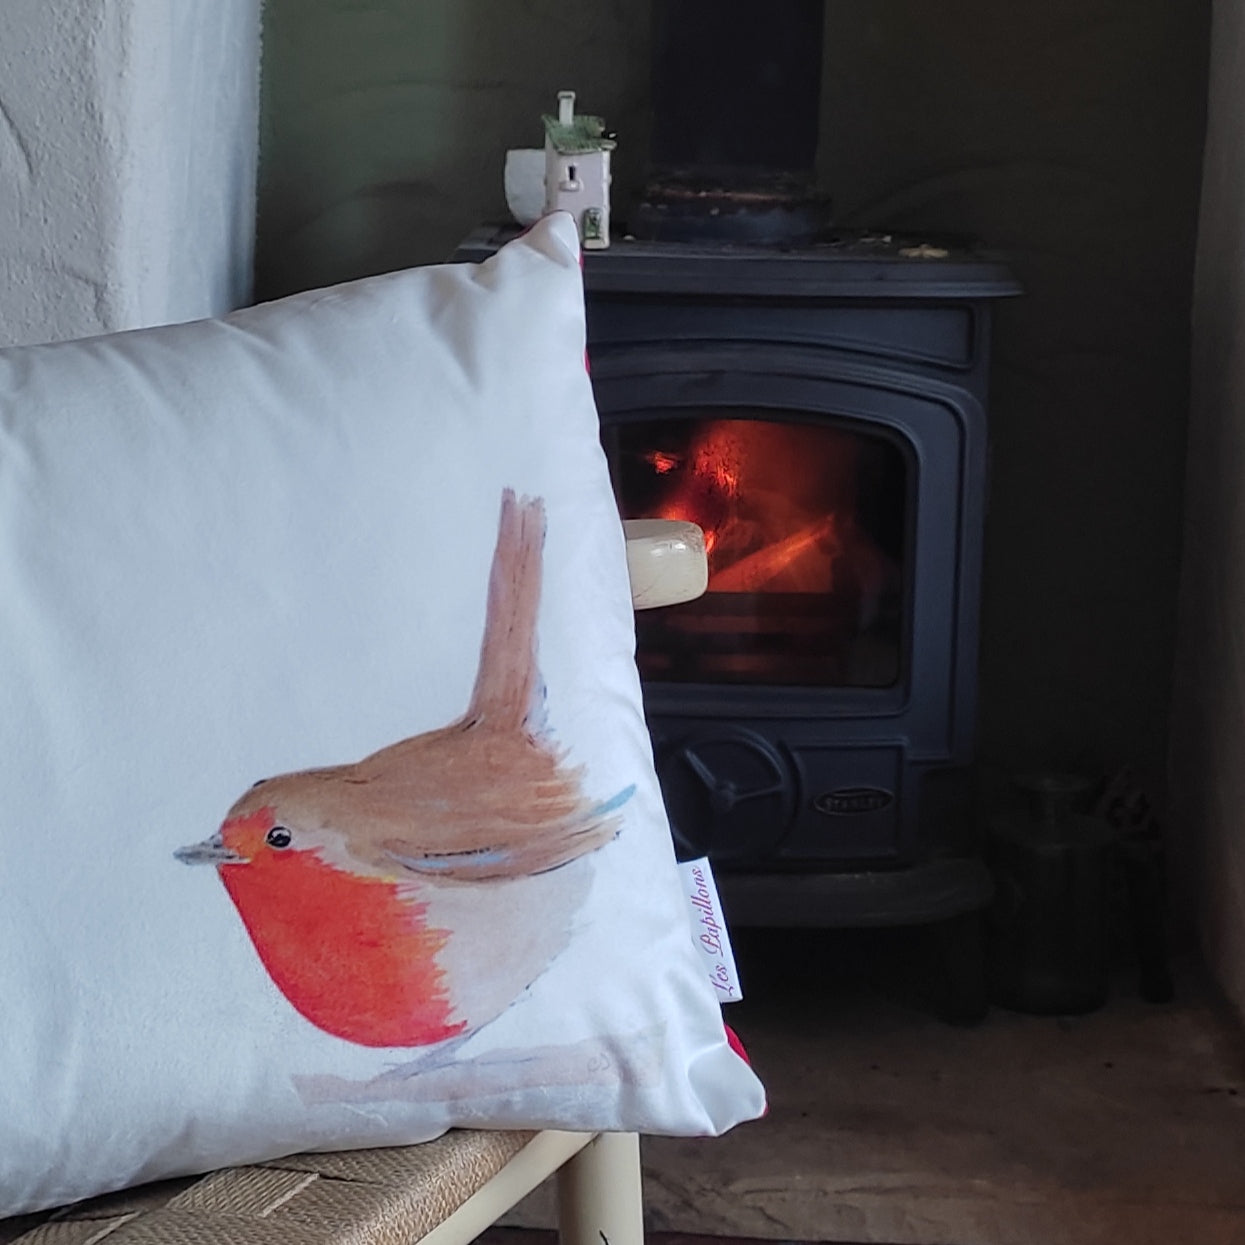 Little Robin Bolster Cushion (Robins appear when loved ones are near)